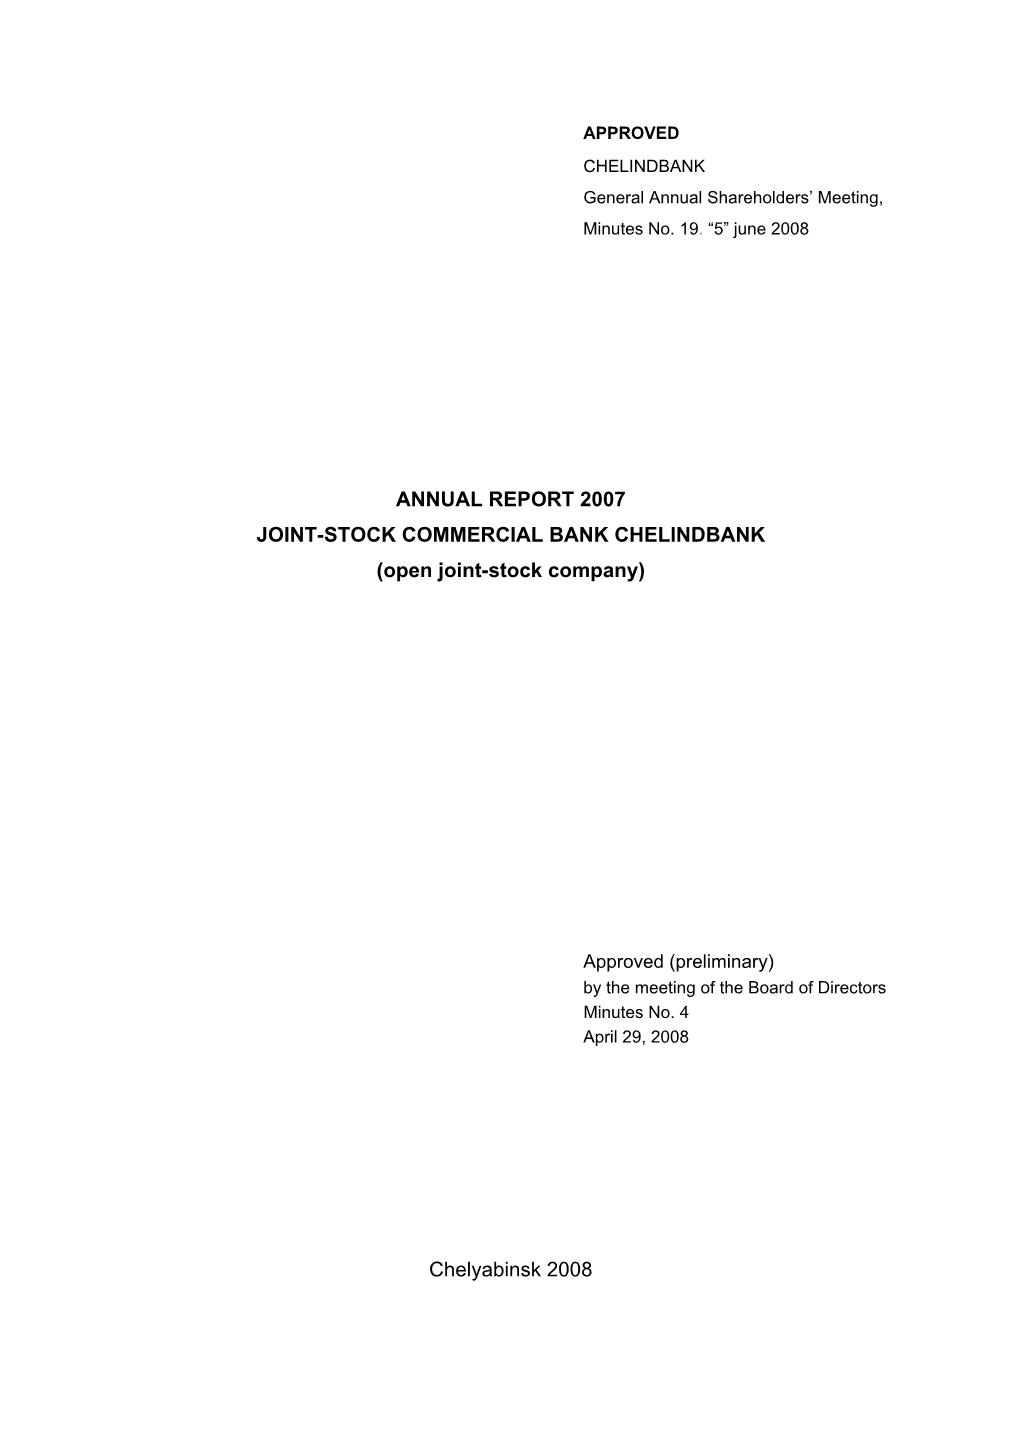 ANNUAL REPORT 2007 JOINT-STOCK COMMERCIAL BANK CHELINDBANK (Open Joint-Stock Company)